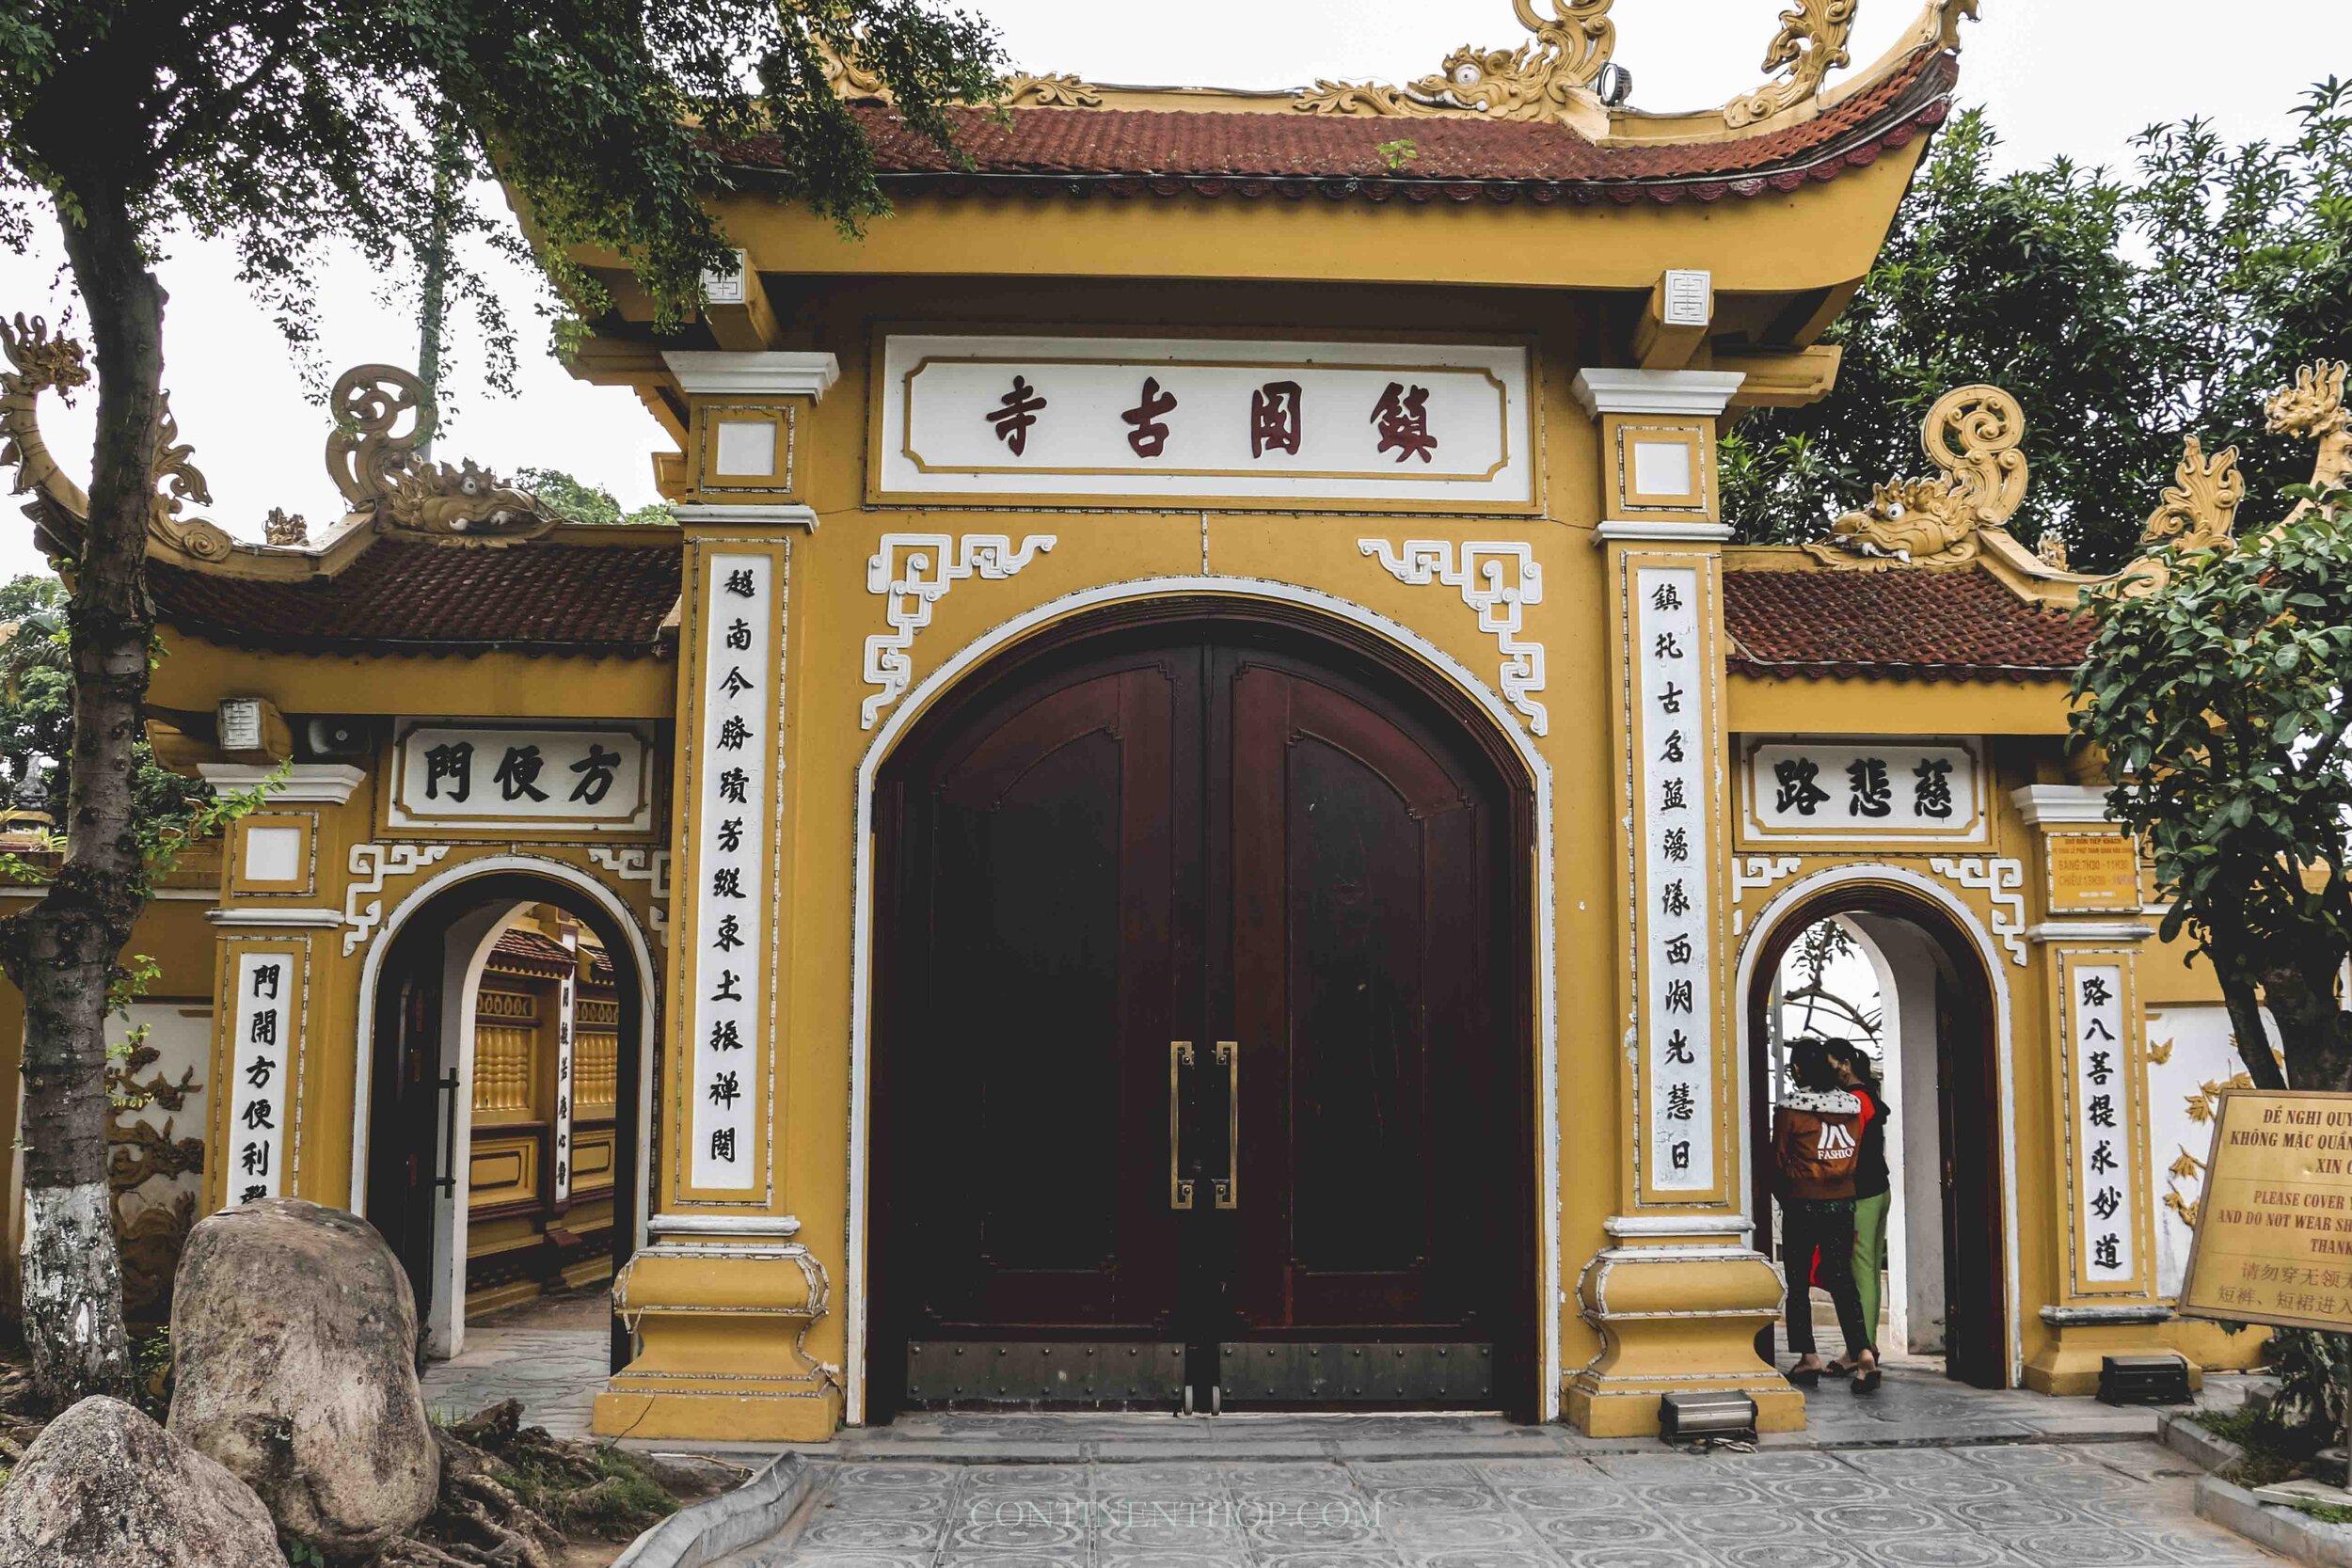 Image of the entrance to the pagoda near West Lake in Hanoi Vietnam